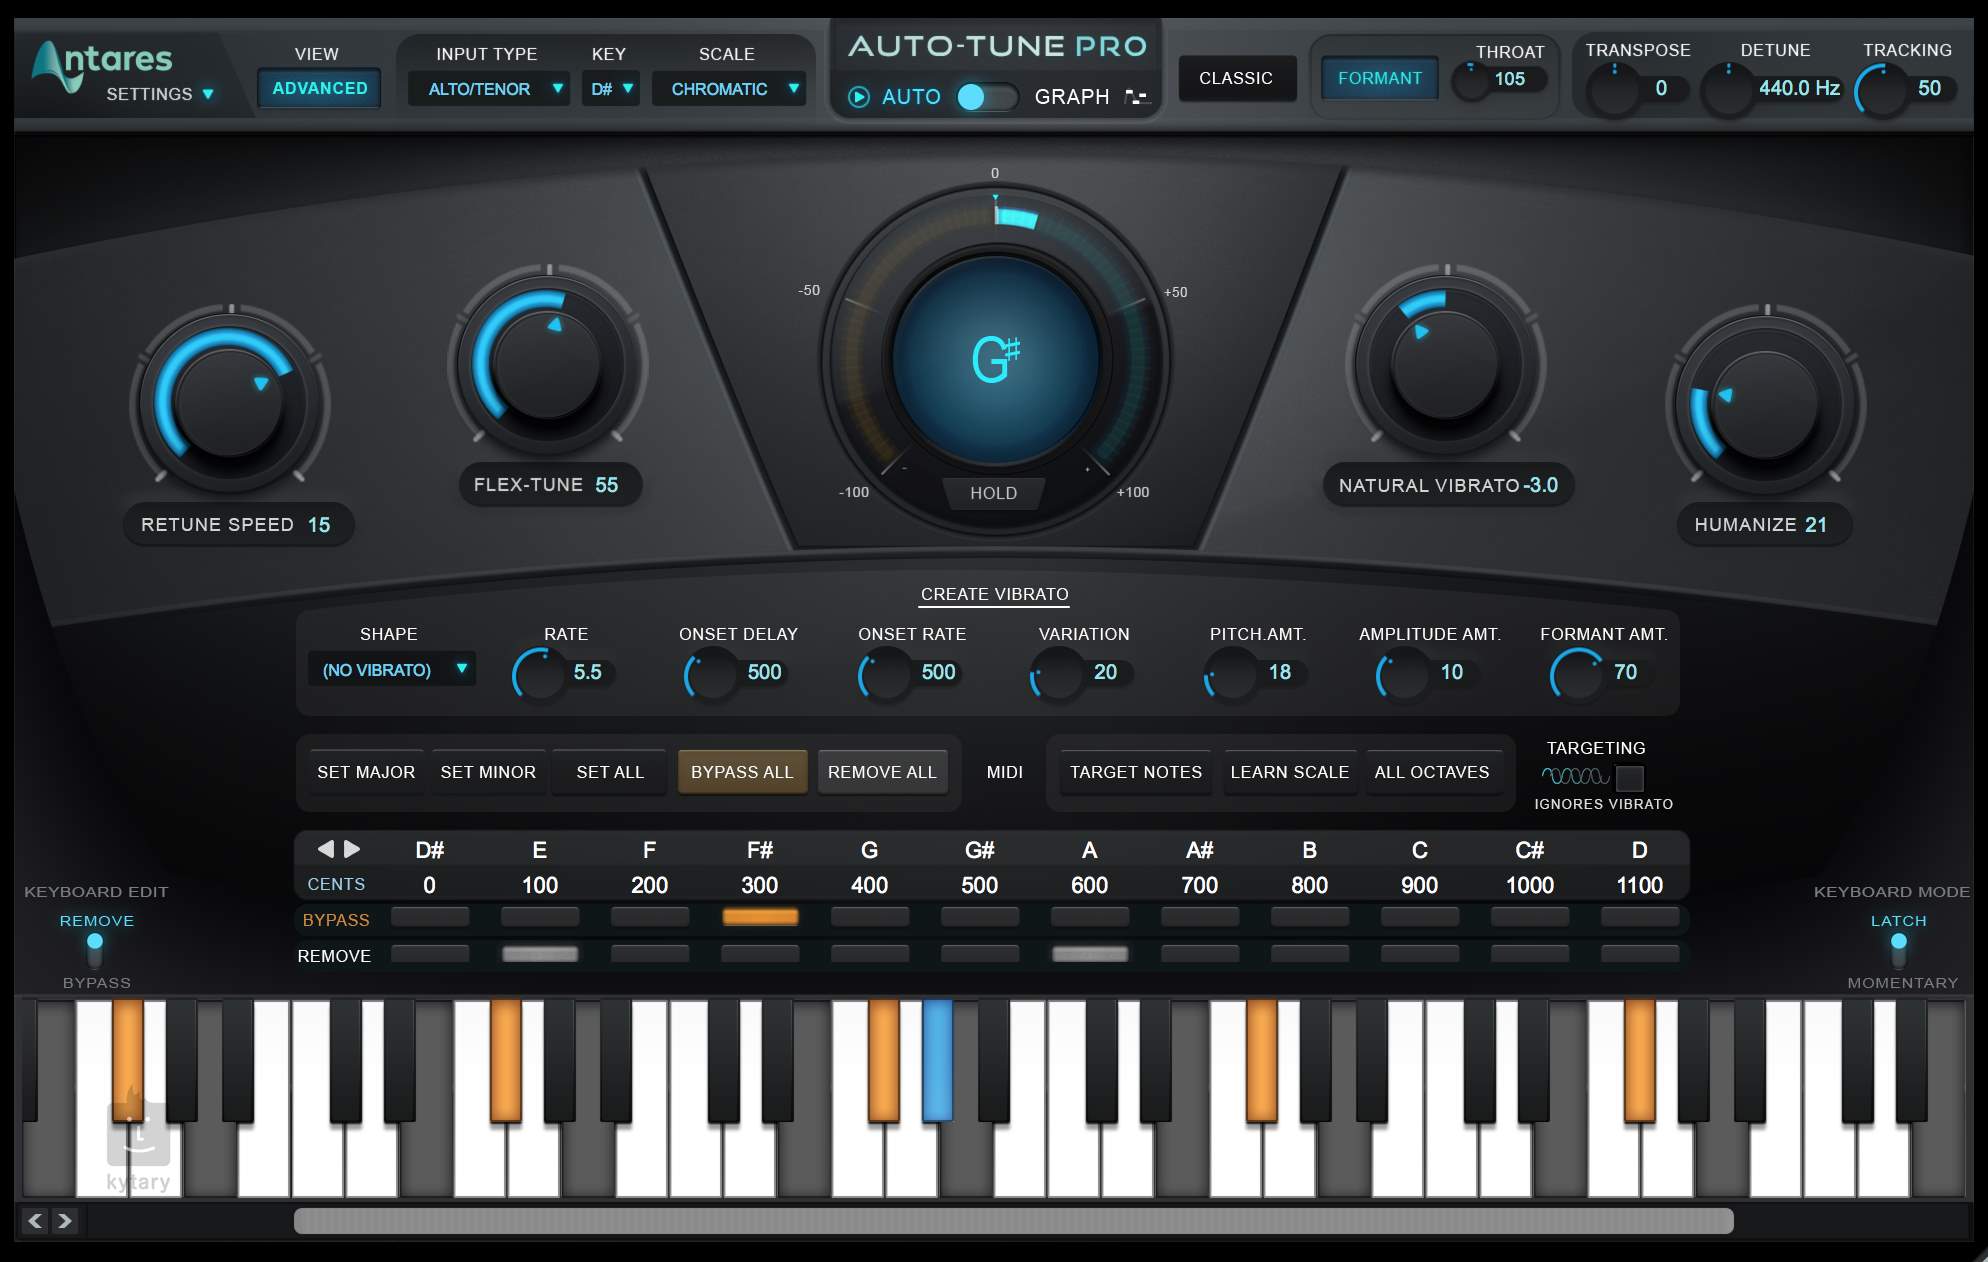 aams mastering software free download